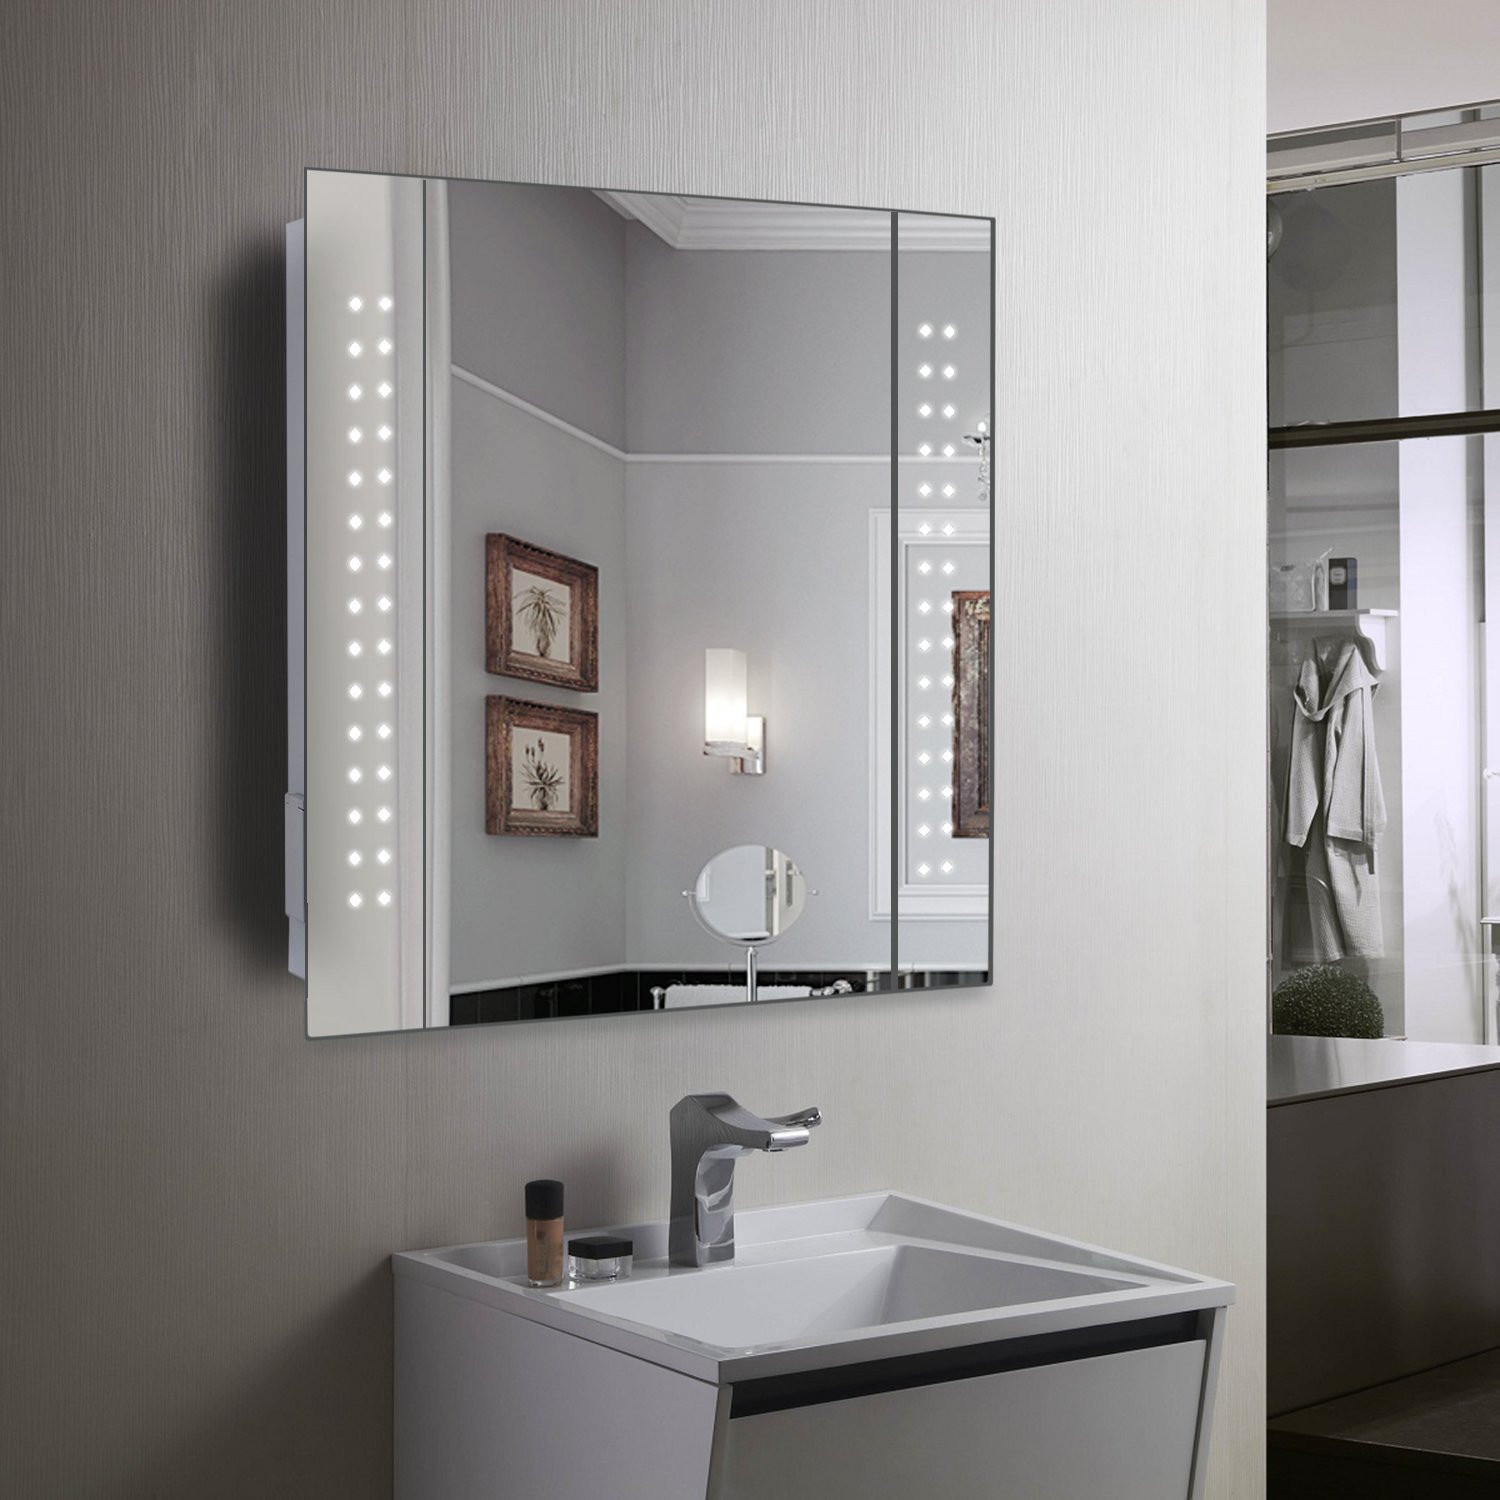 Bathroom Mirror Cabinet With Light
 19 Ideal Light Up Pillows for Long Distance